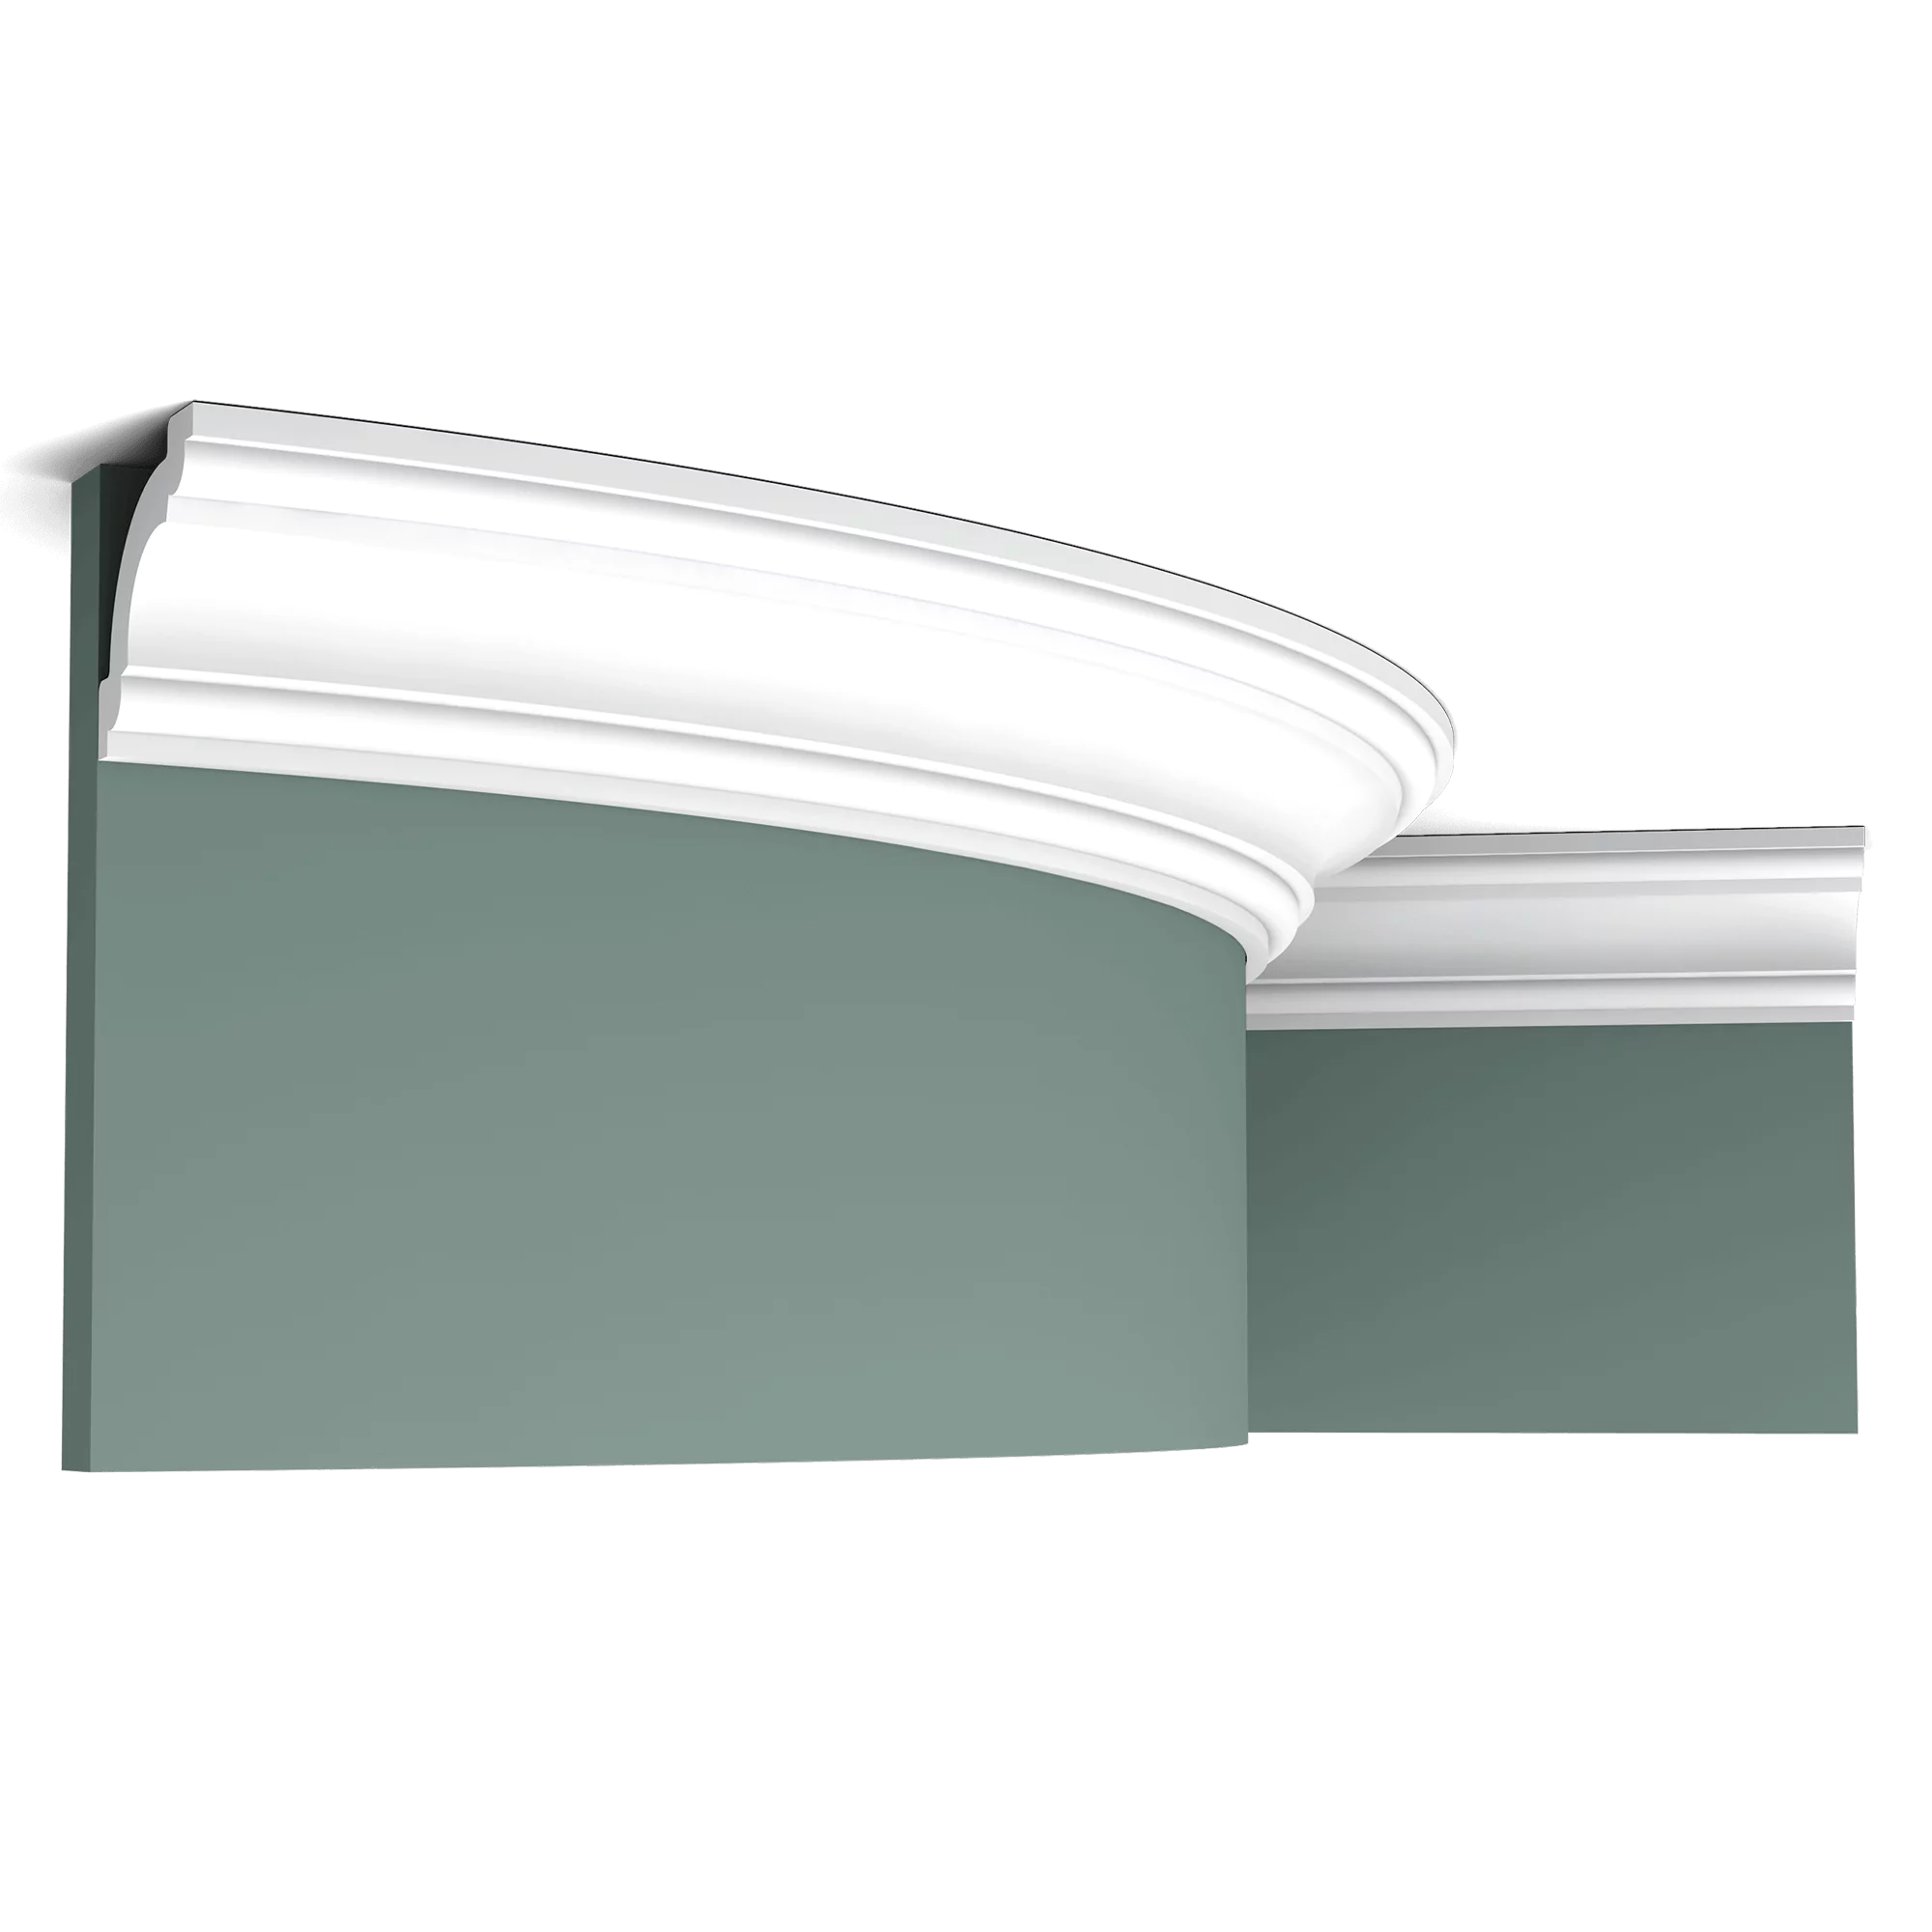 Flexible version of the CX124. This classic cornice moulding with elegant curves creates a neat transition from wall to ceiling. Thanks to its Flex technology, curved walls and surfaces are no problem. Installation remark: It is necessary to screw this profile on the wall. Flex Radius: R min = 160 cm